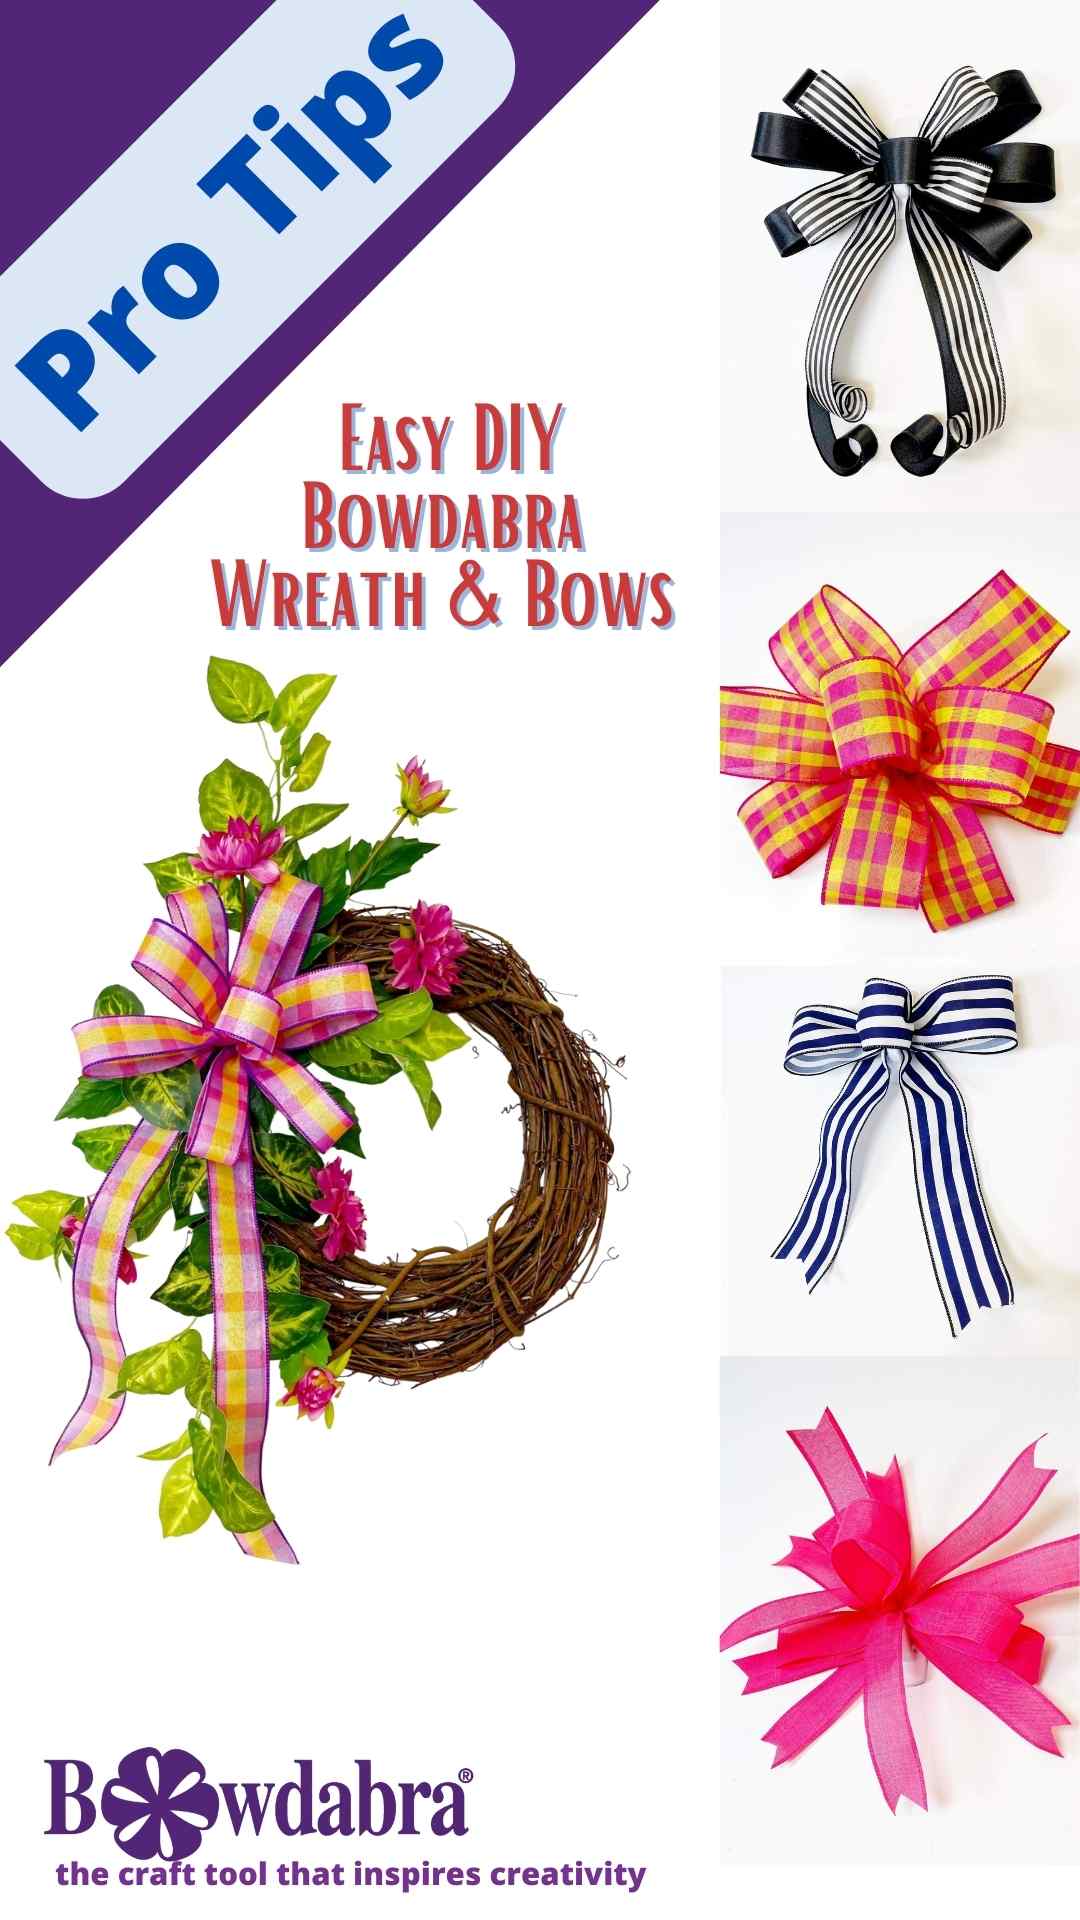 How to make Easy DIY Wreath & Bows - Bowdabra Tips